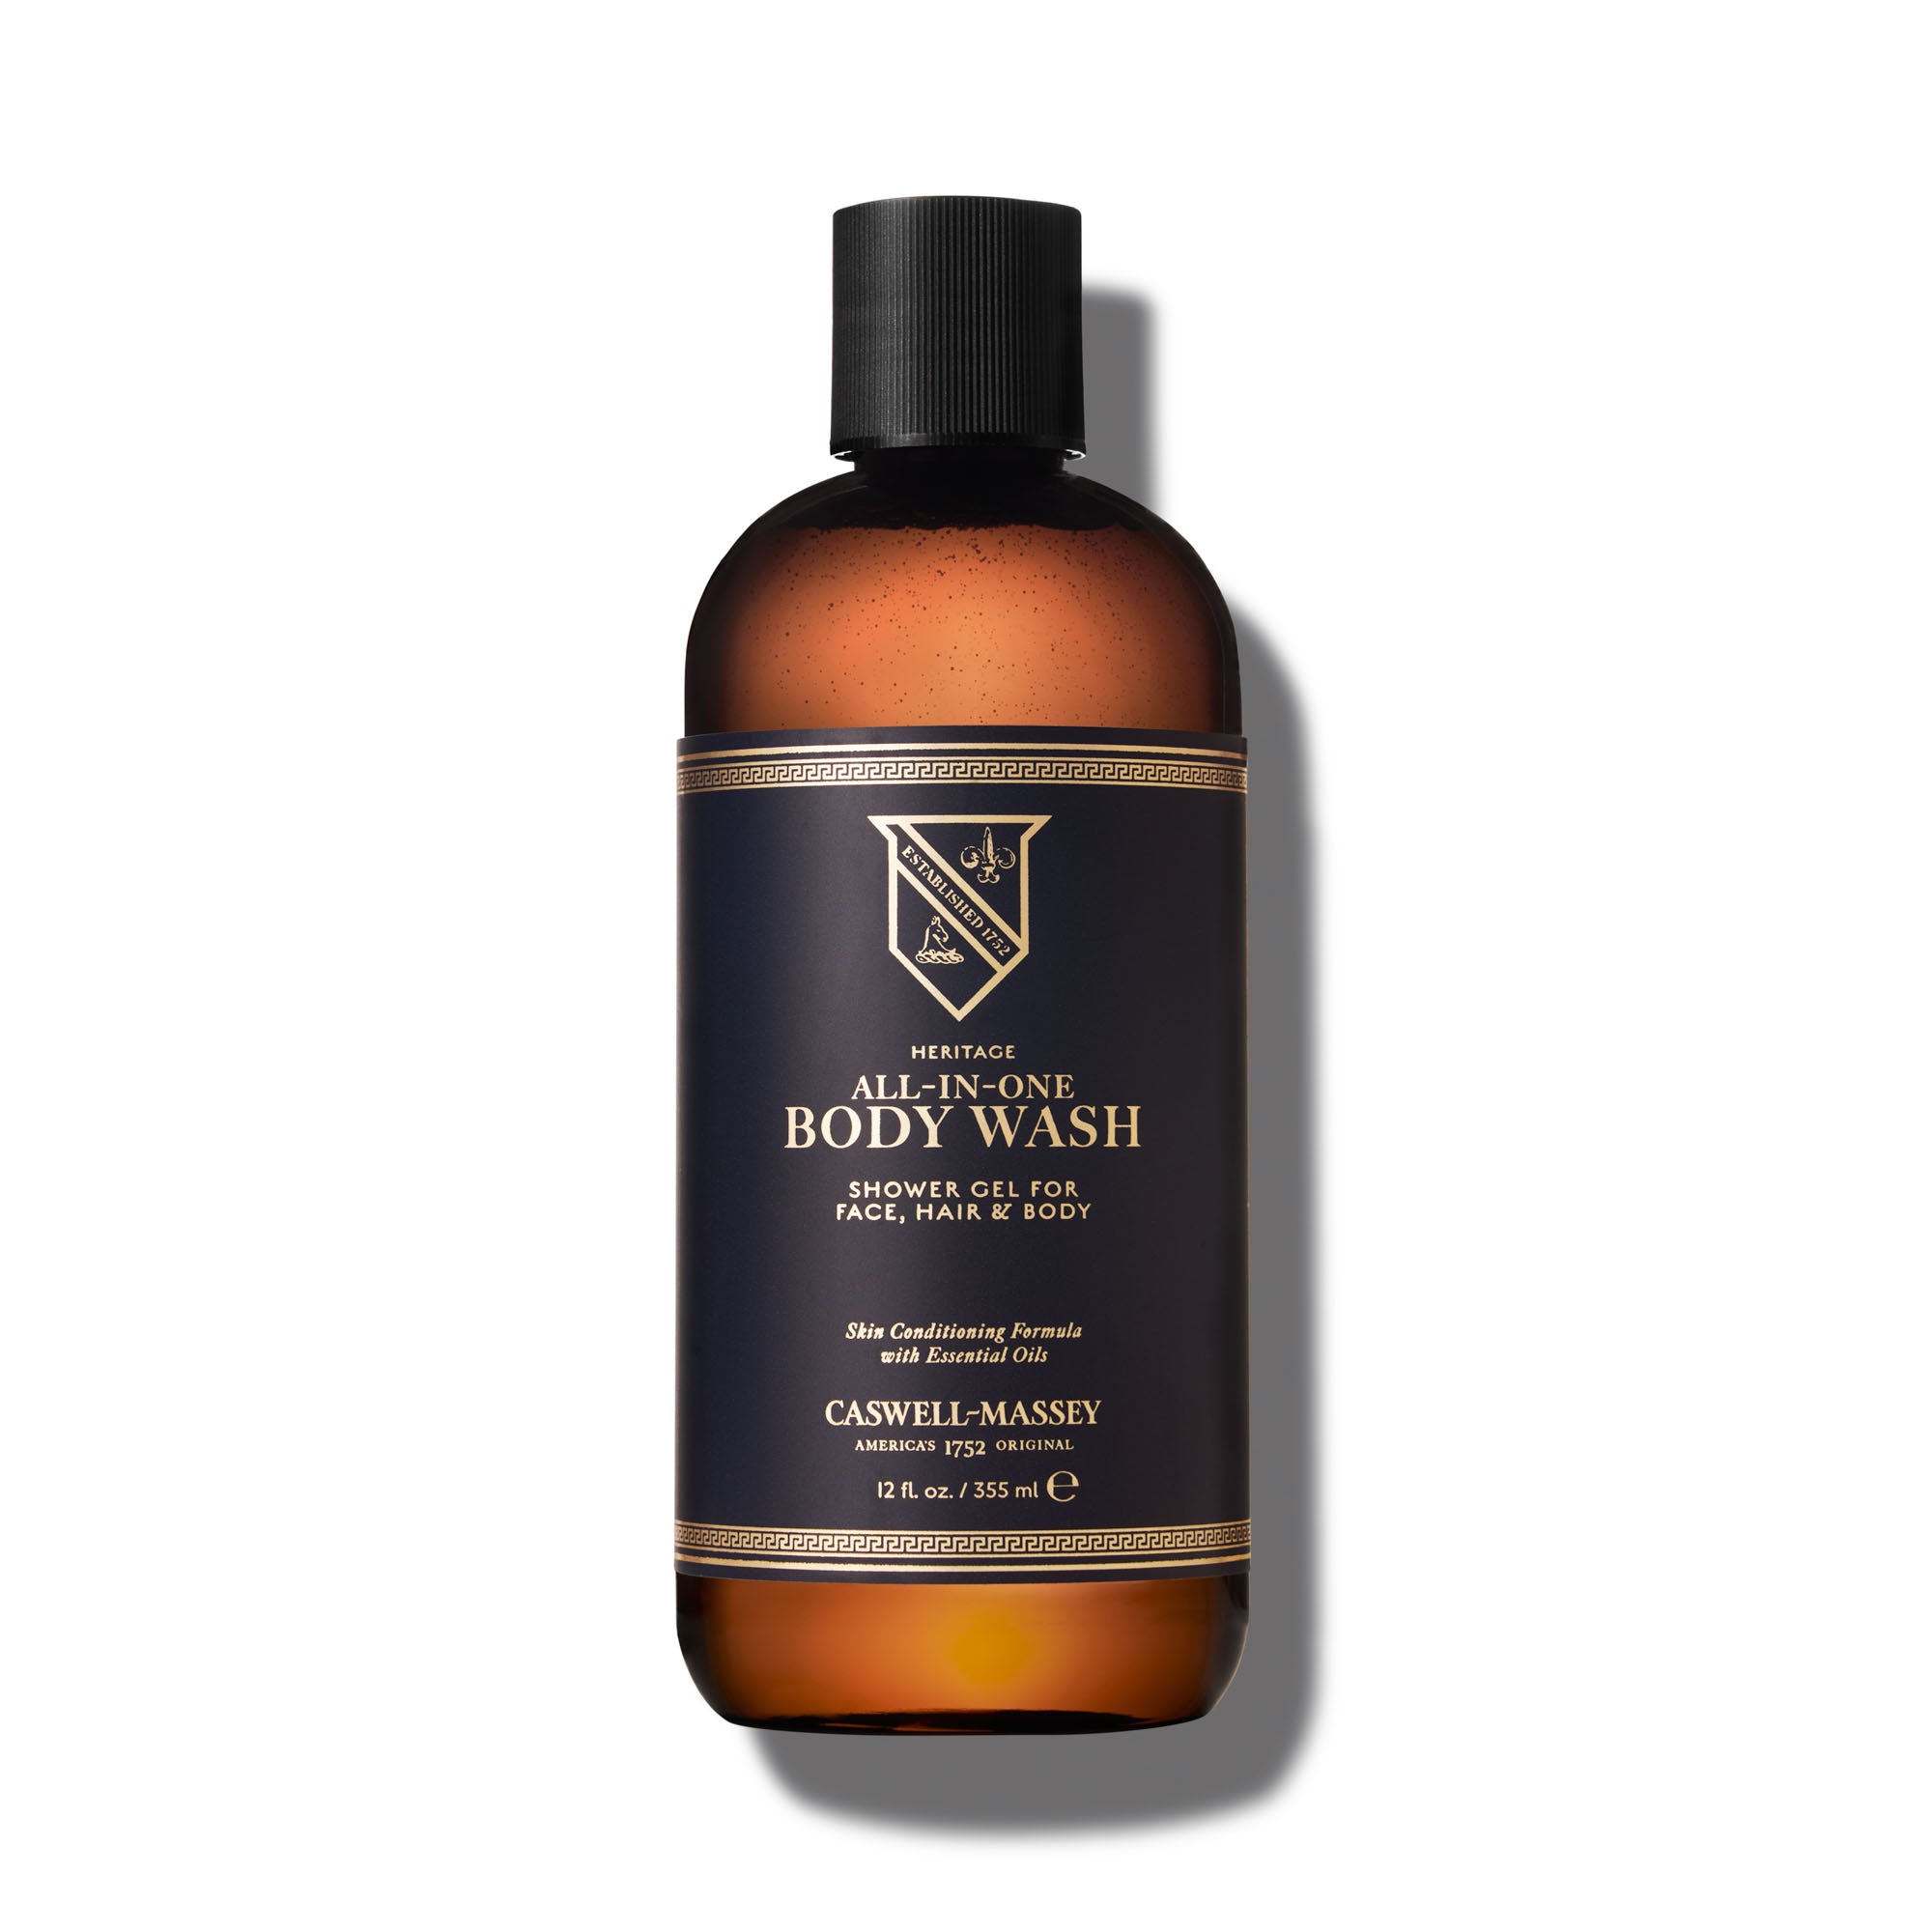 Caswell-Massey Heritage All-in-One Body Wash, Shampoo, Beard Wash, Face Wash and More, 12oz